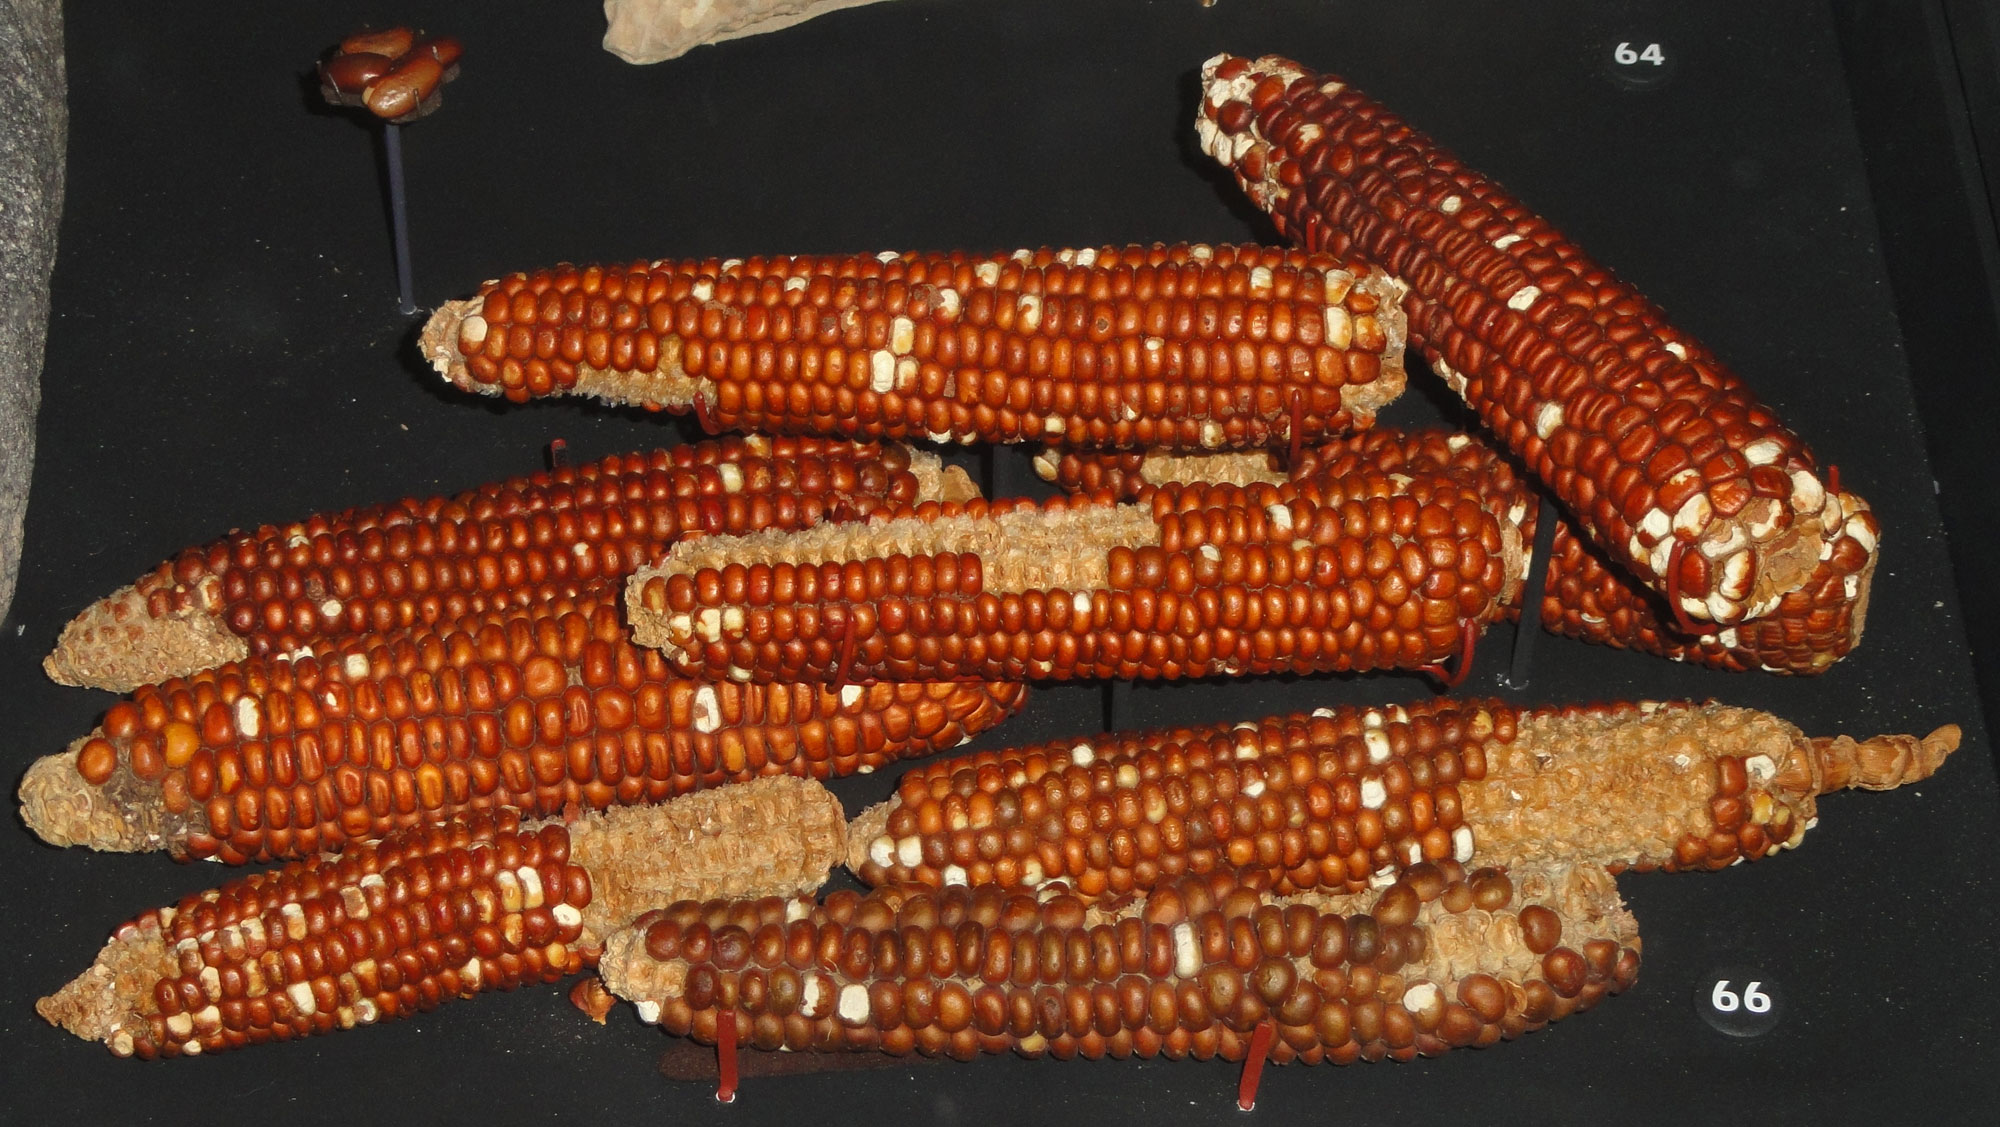 Photograph of eight ears of maize on a black background from Triangle Cave in Utah, U.S.A. The ears are from between 900 and 1300 AD and look much like modern maize ears, although the kernels are burnt orange in color.